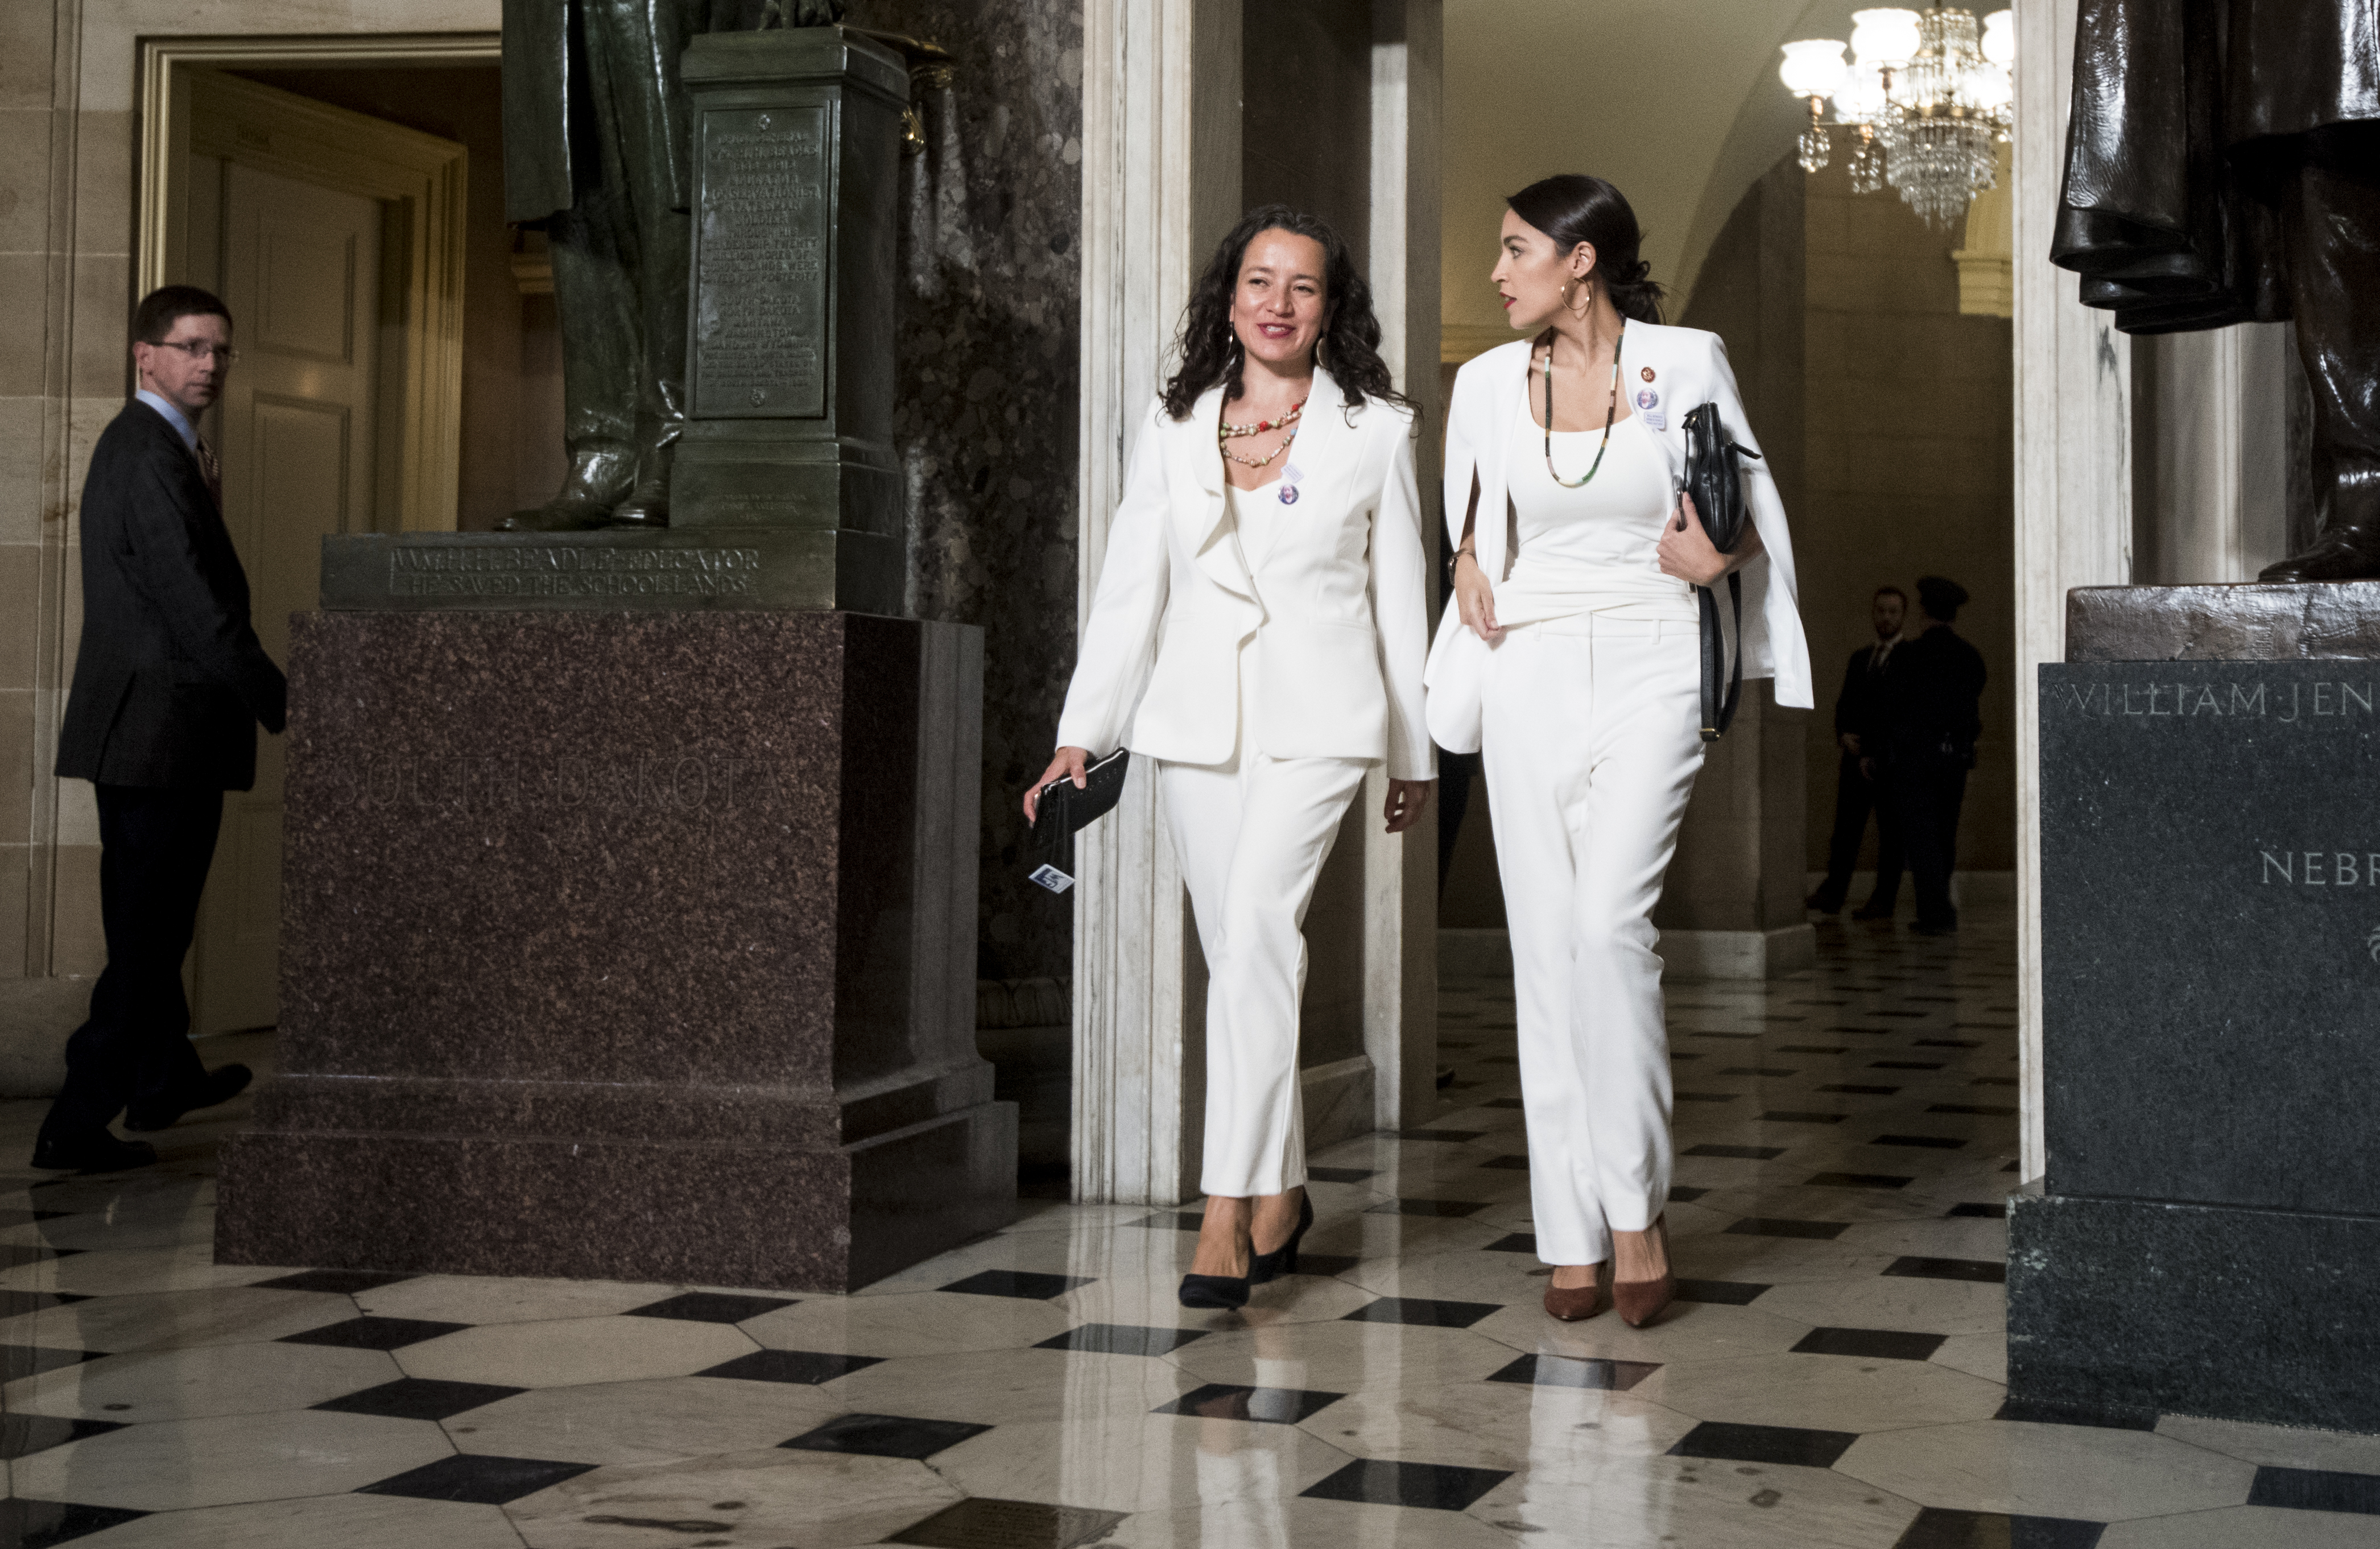 Rep. Alexandria Ocasio-Cortez, right, walks with her State of the Union guest Ana Maria Archila to the House chamber for President Donald Trump's State of the Union address to a joint session of Congress in the Capitol on Feb. 5, 2019. (Bill Clark—CQ-Roll Call/Getty Images)